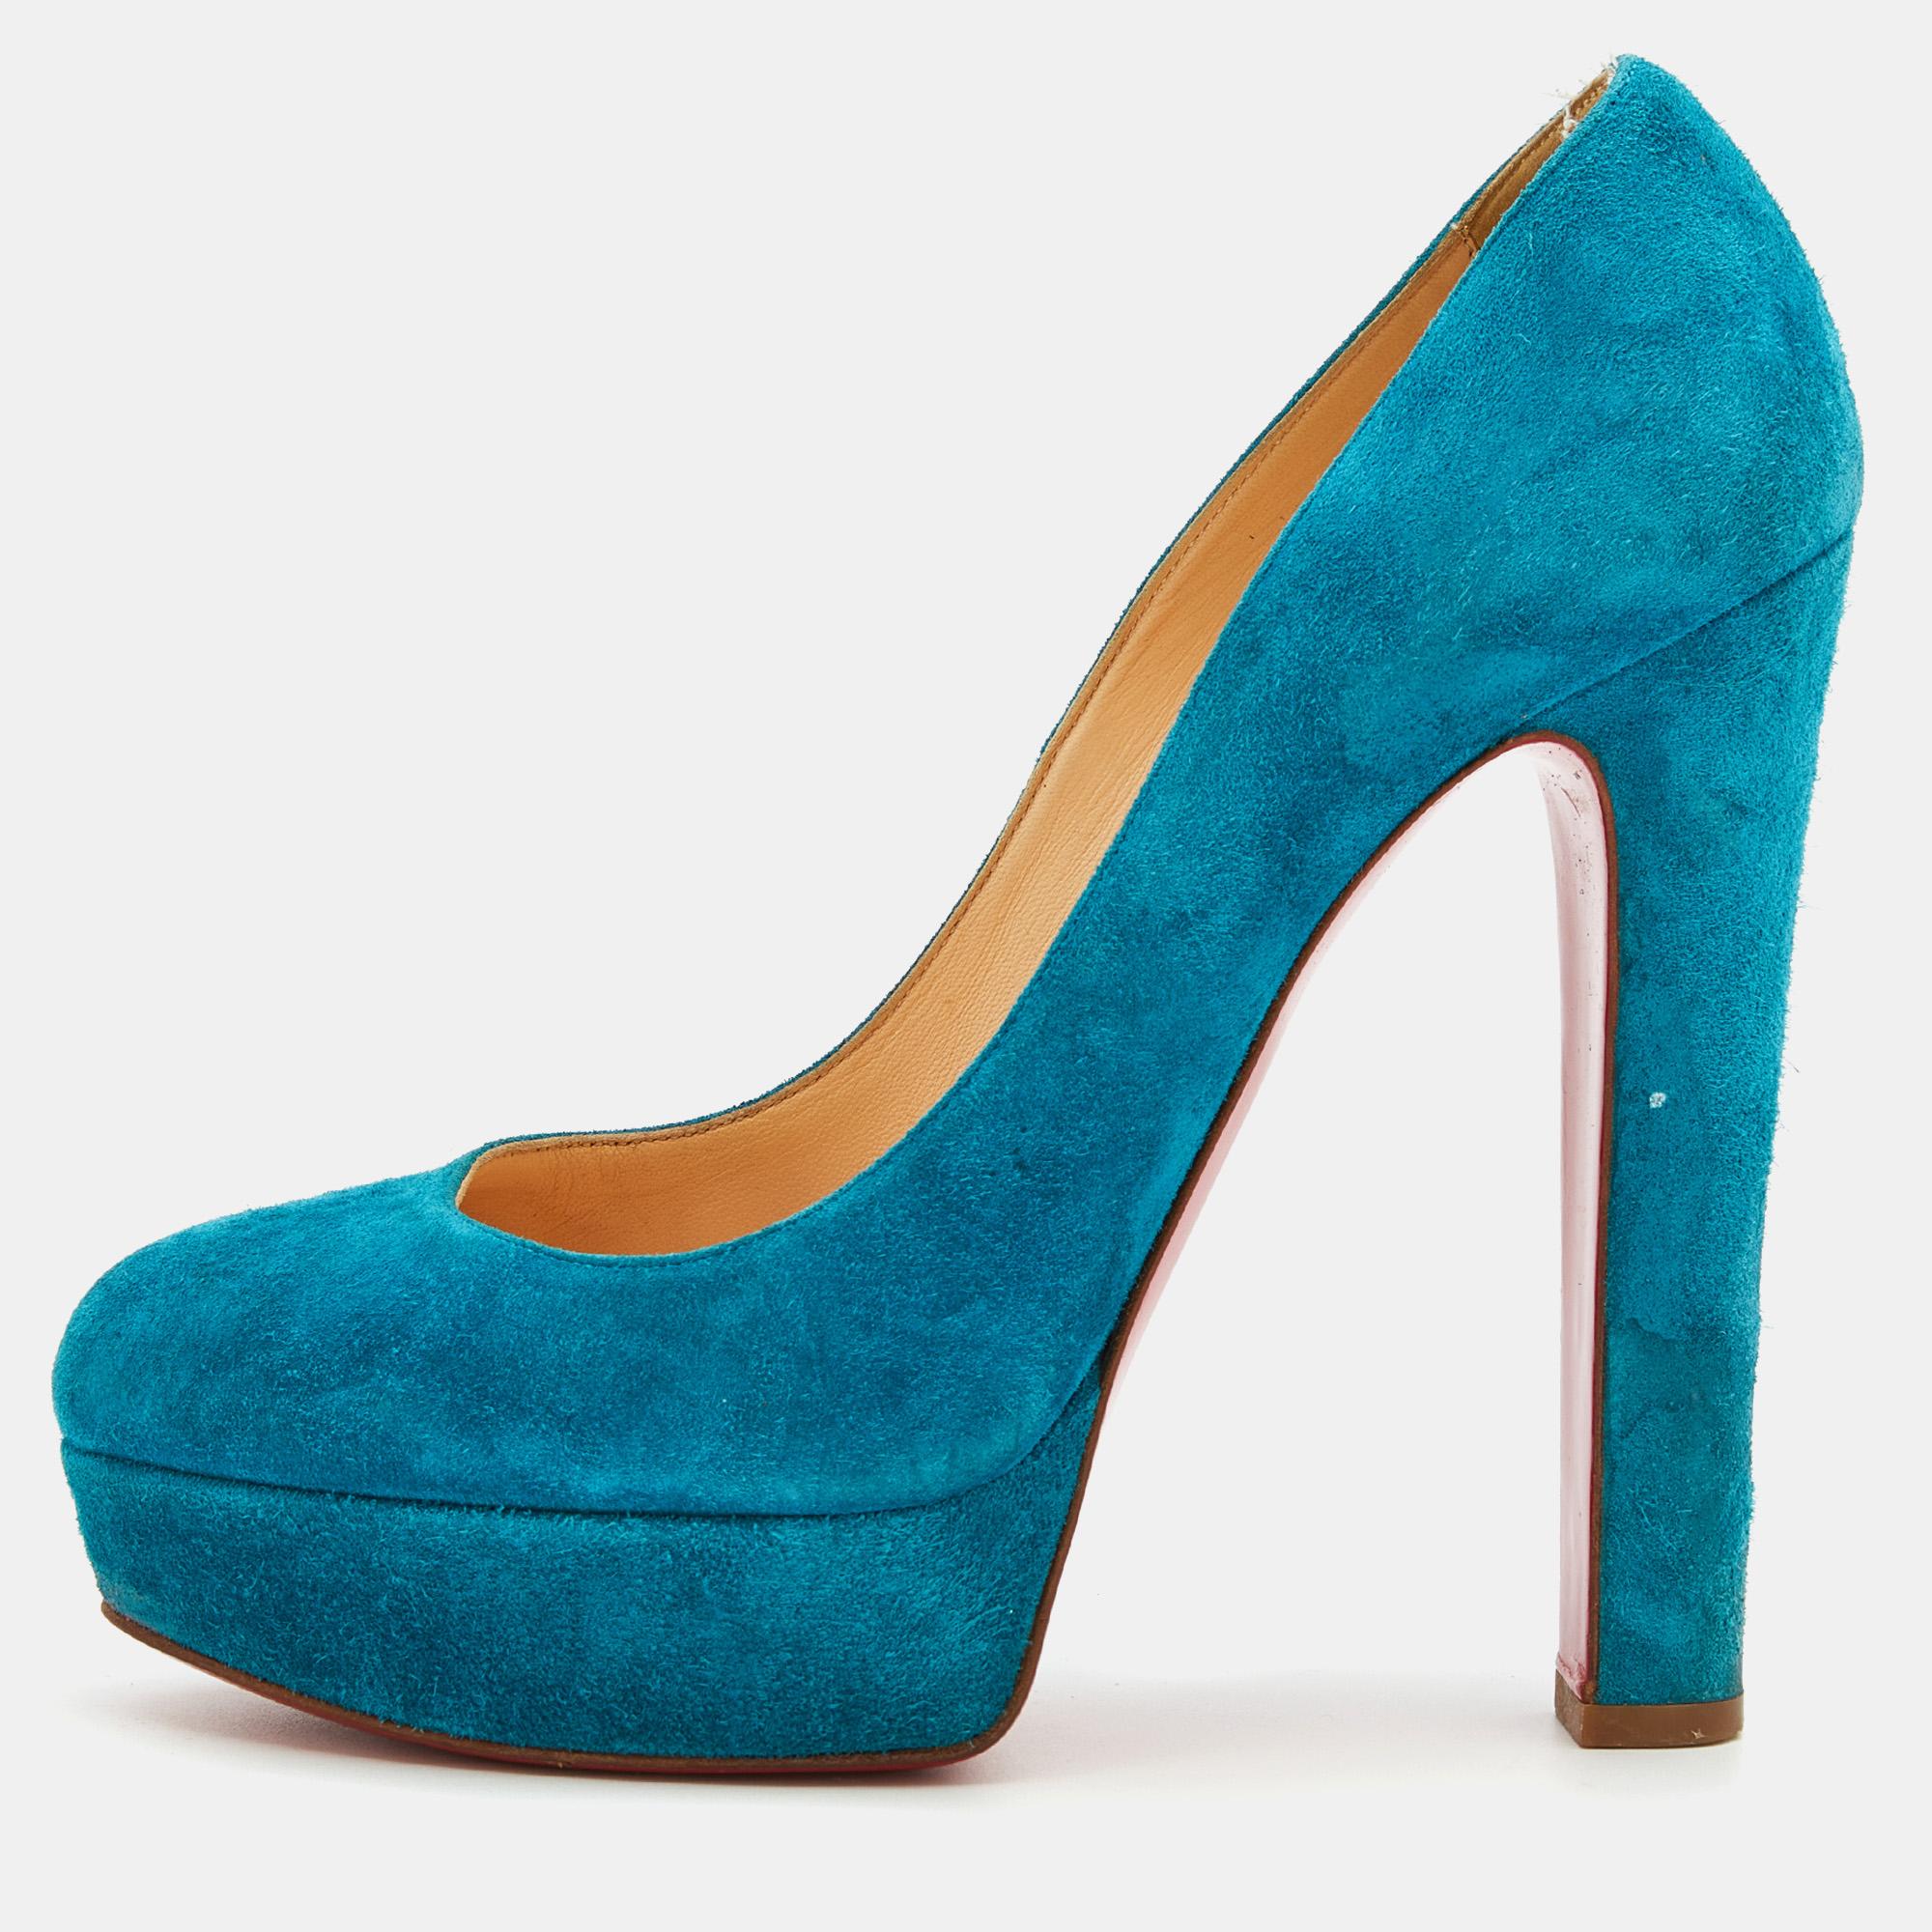 Take your casual outfit to the next level with this pair of Christian Louboutin pumps. Made from lovely blue suede, they have a simple design and feature sturdy platforms and towering 14 cm heels.

